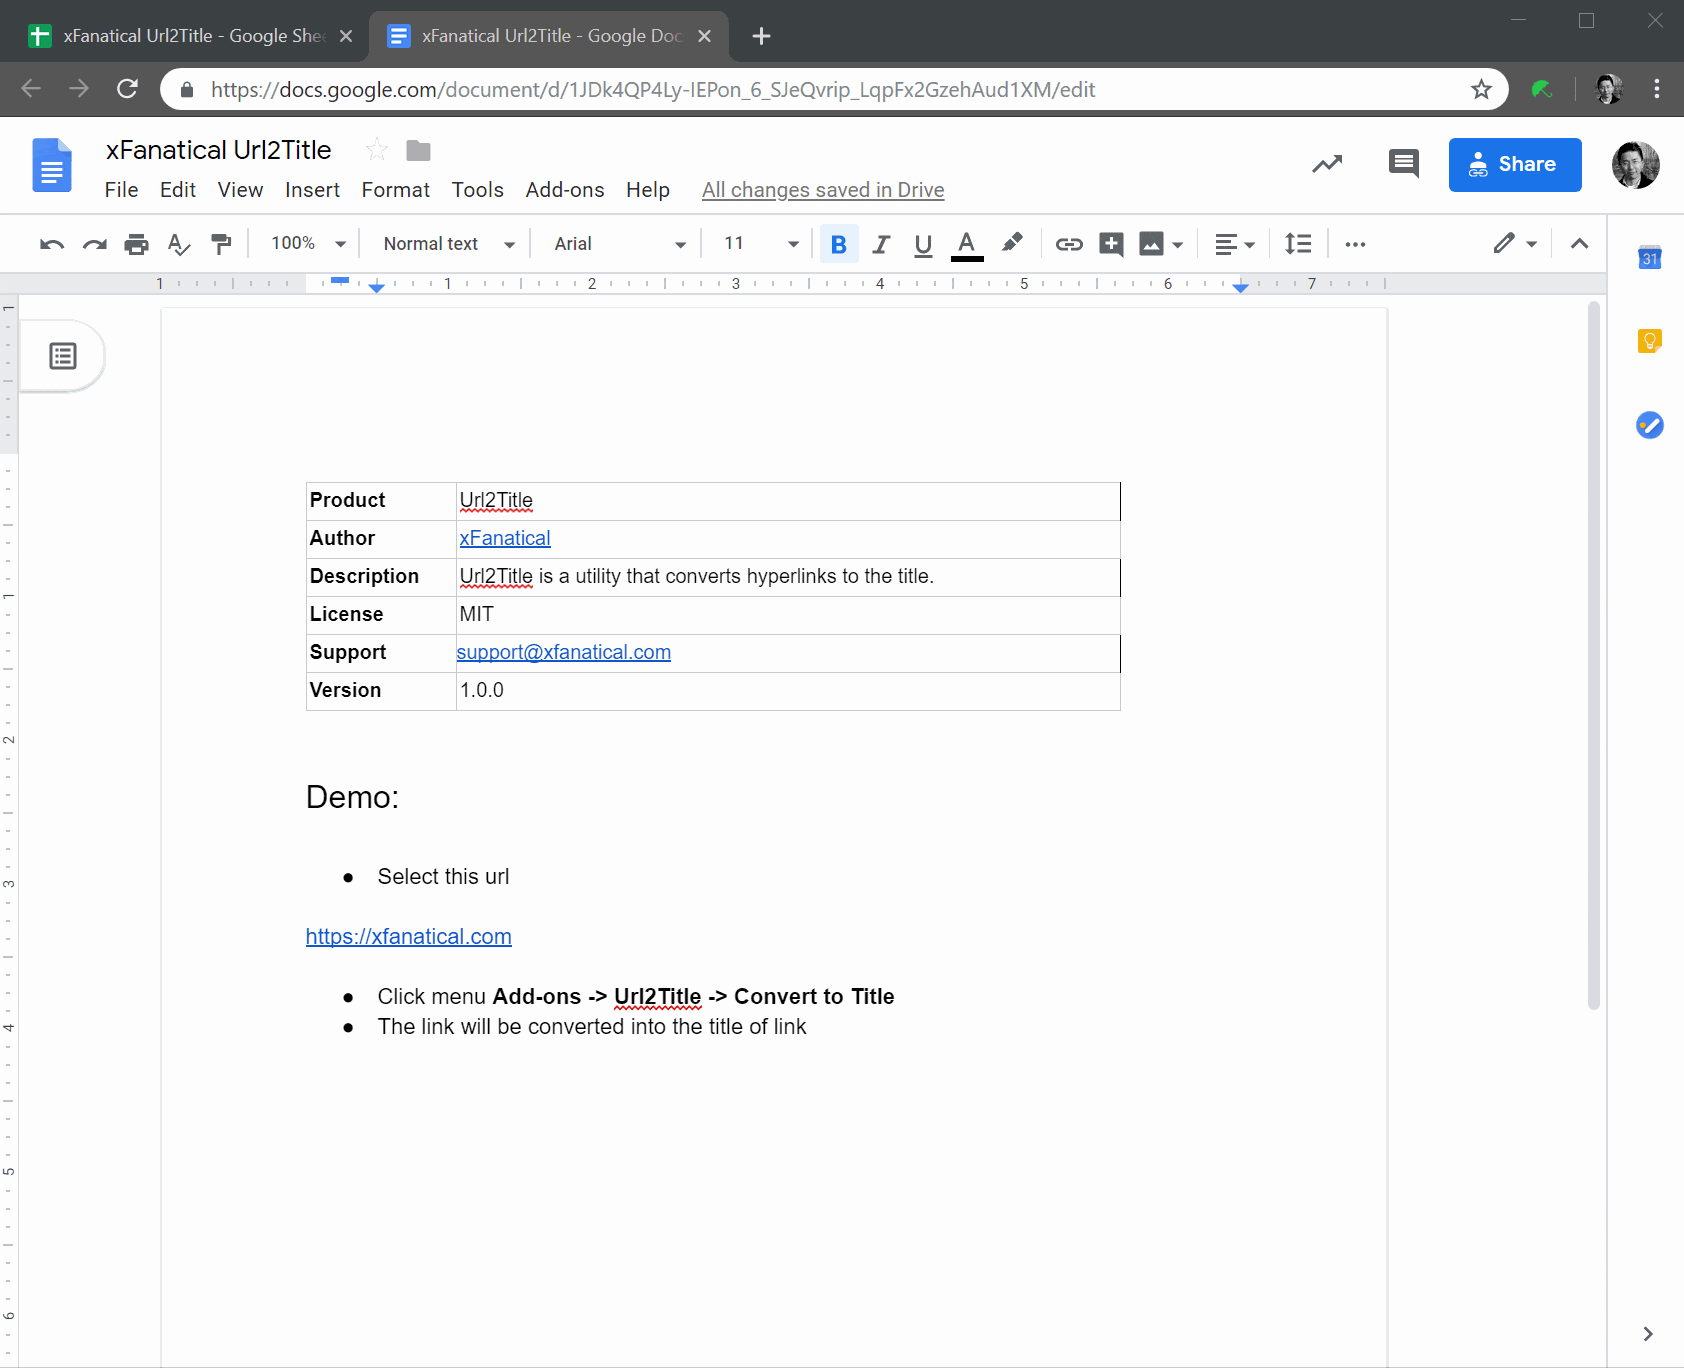 Demonstration of getting the page title to a link in google docs using url2title